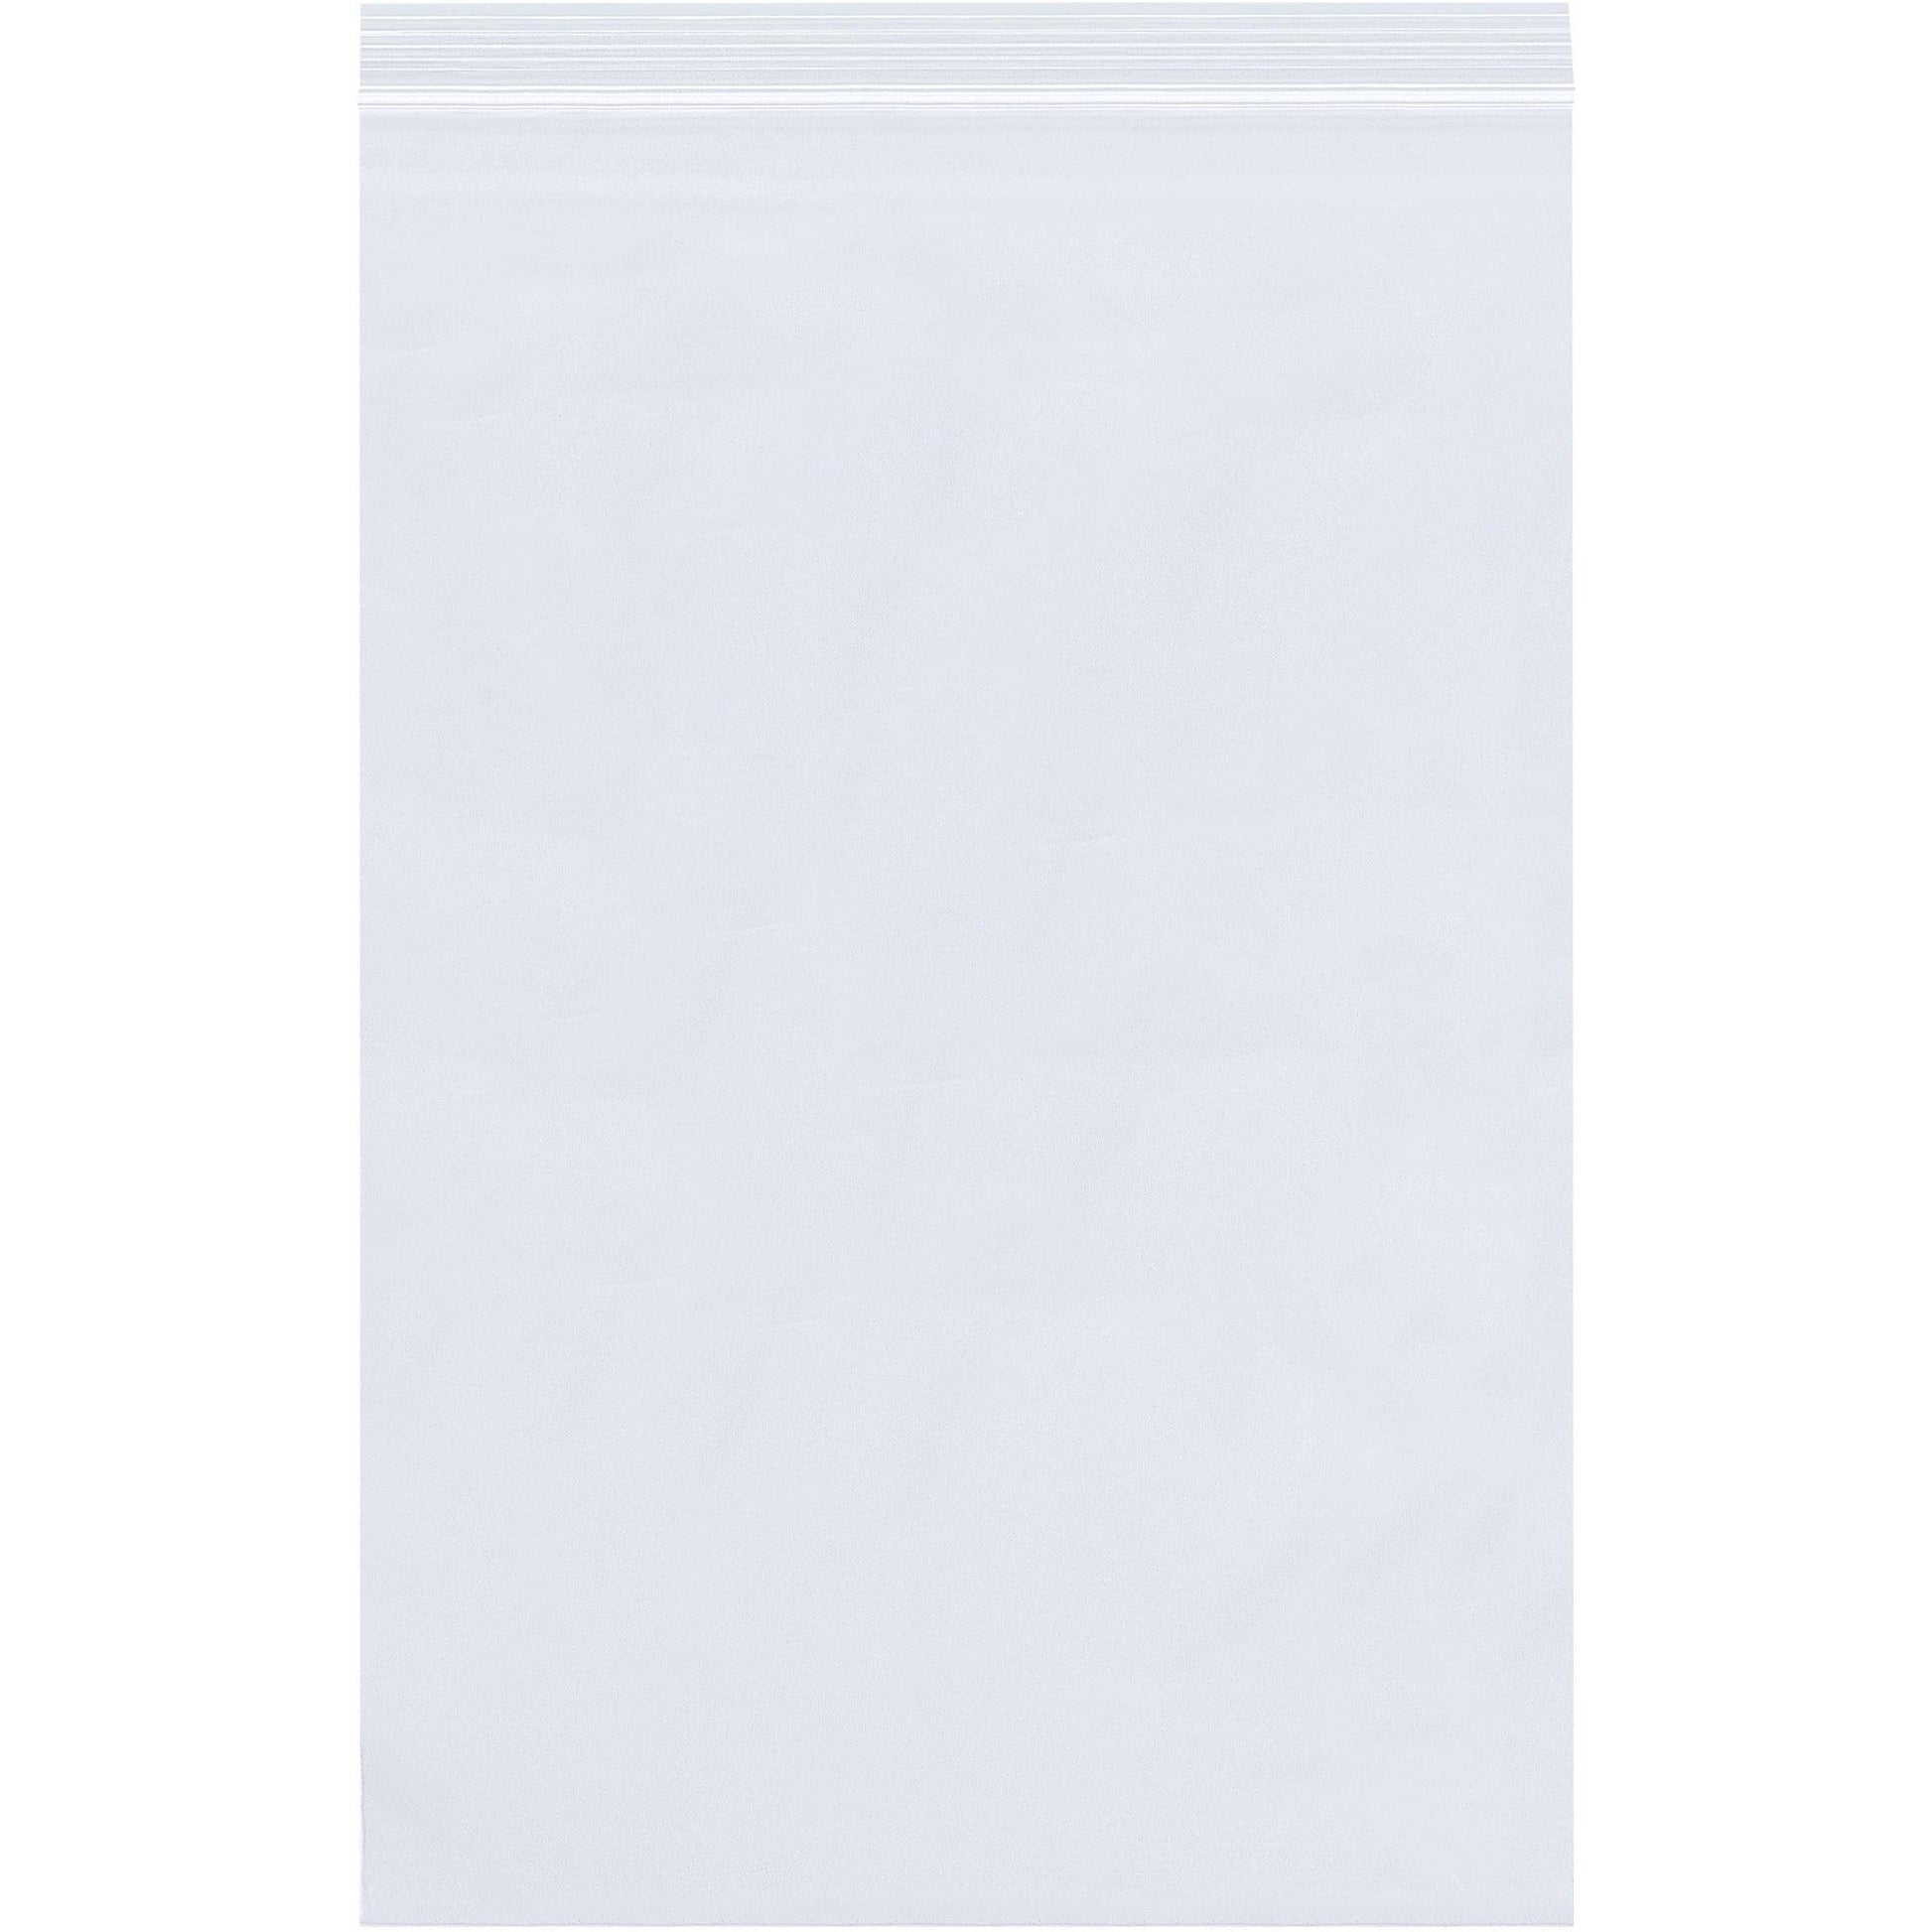 5 x 14" - 2 Mil Reclosable Poly Bags - PB3774